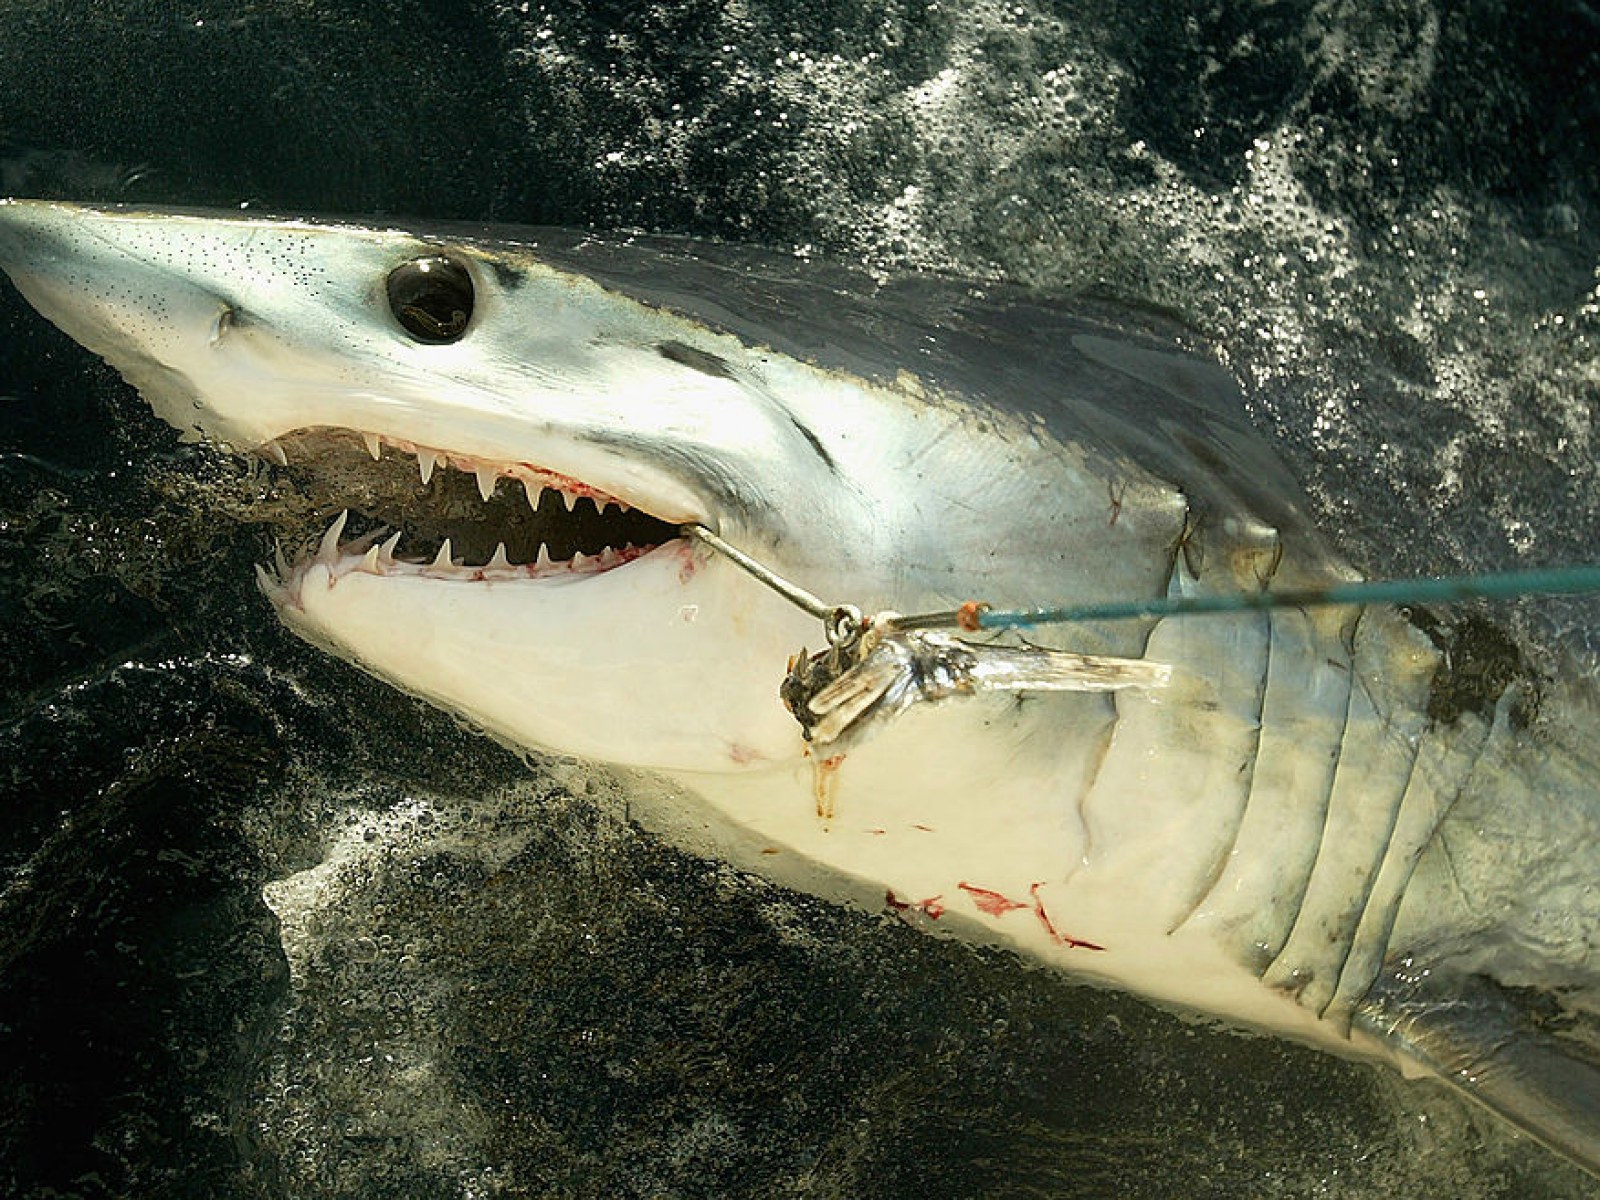 Scientists Amazed At The Power Of Sharks Share Photo Of Hook Bent By Aggressive Mako